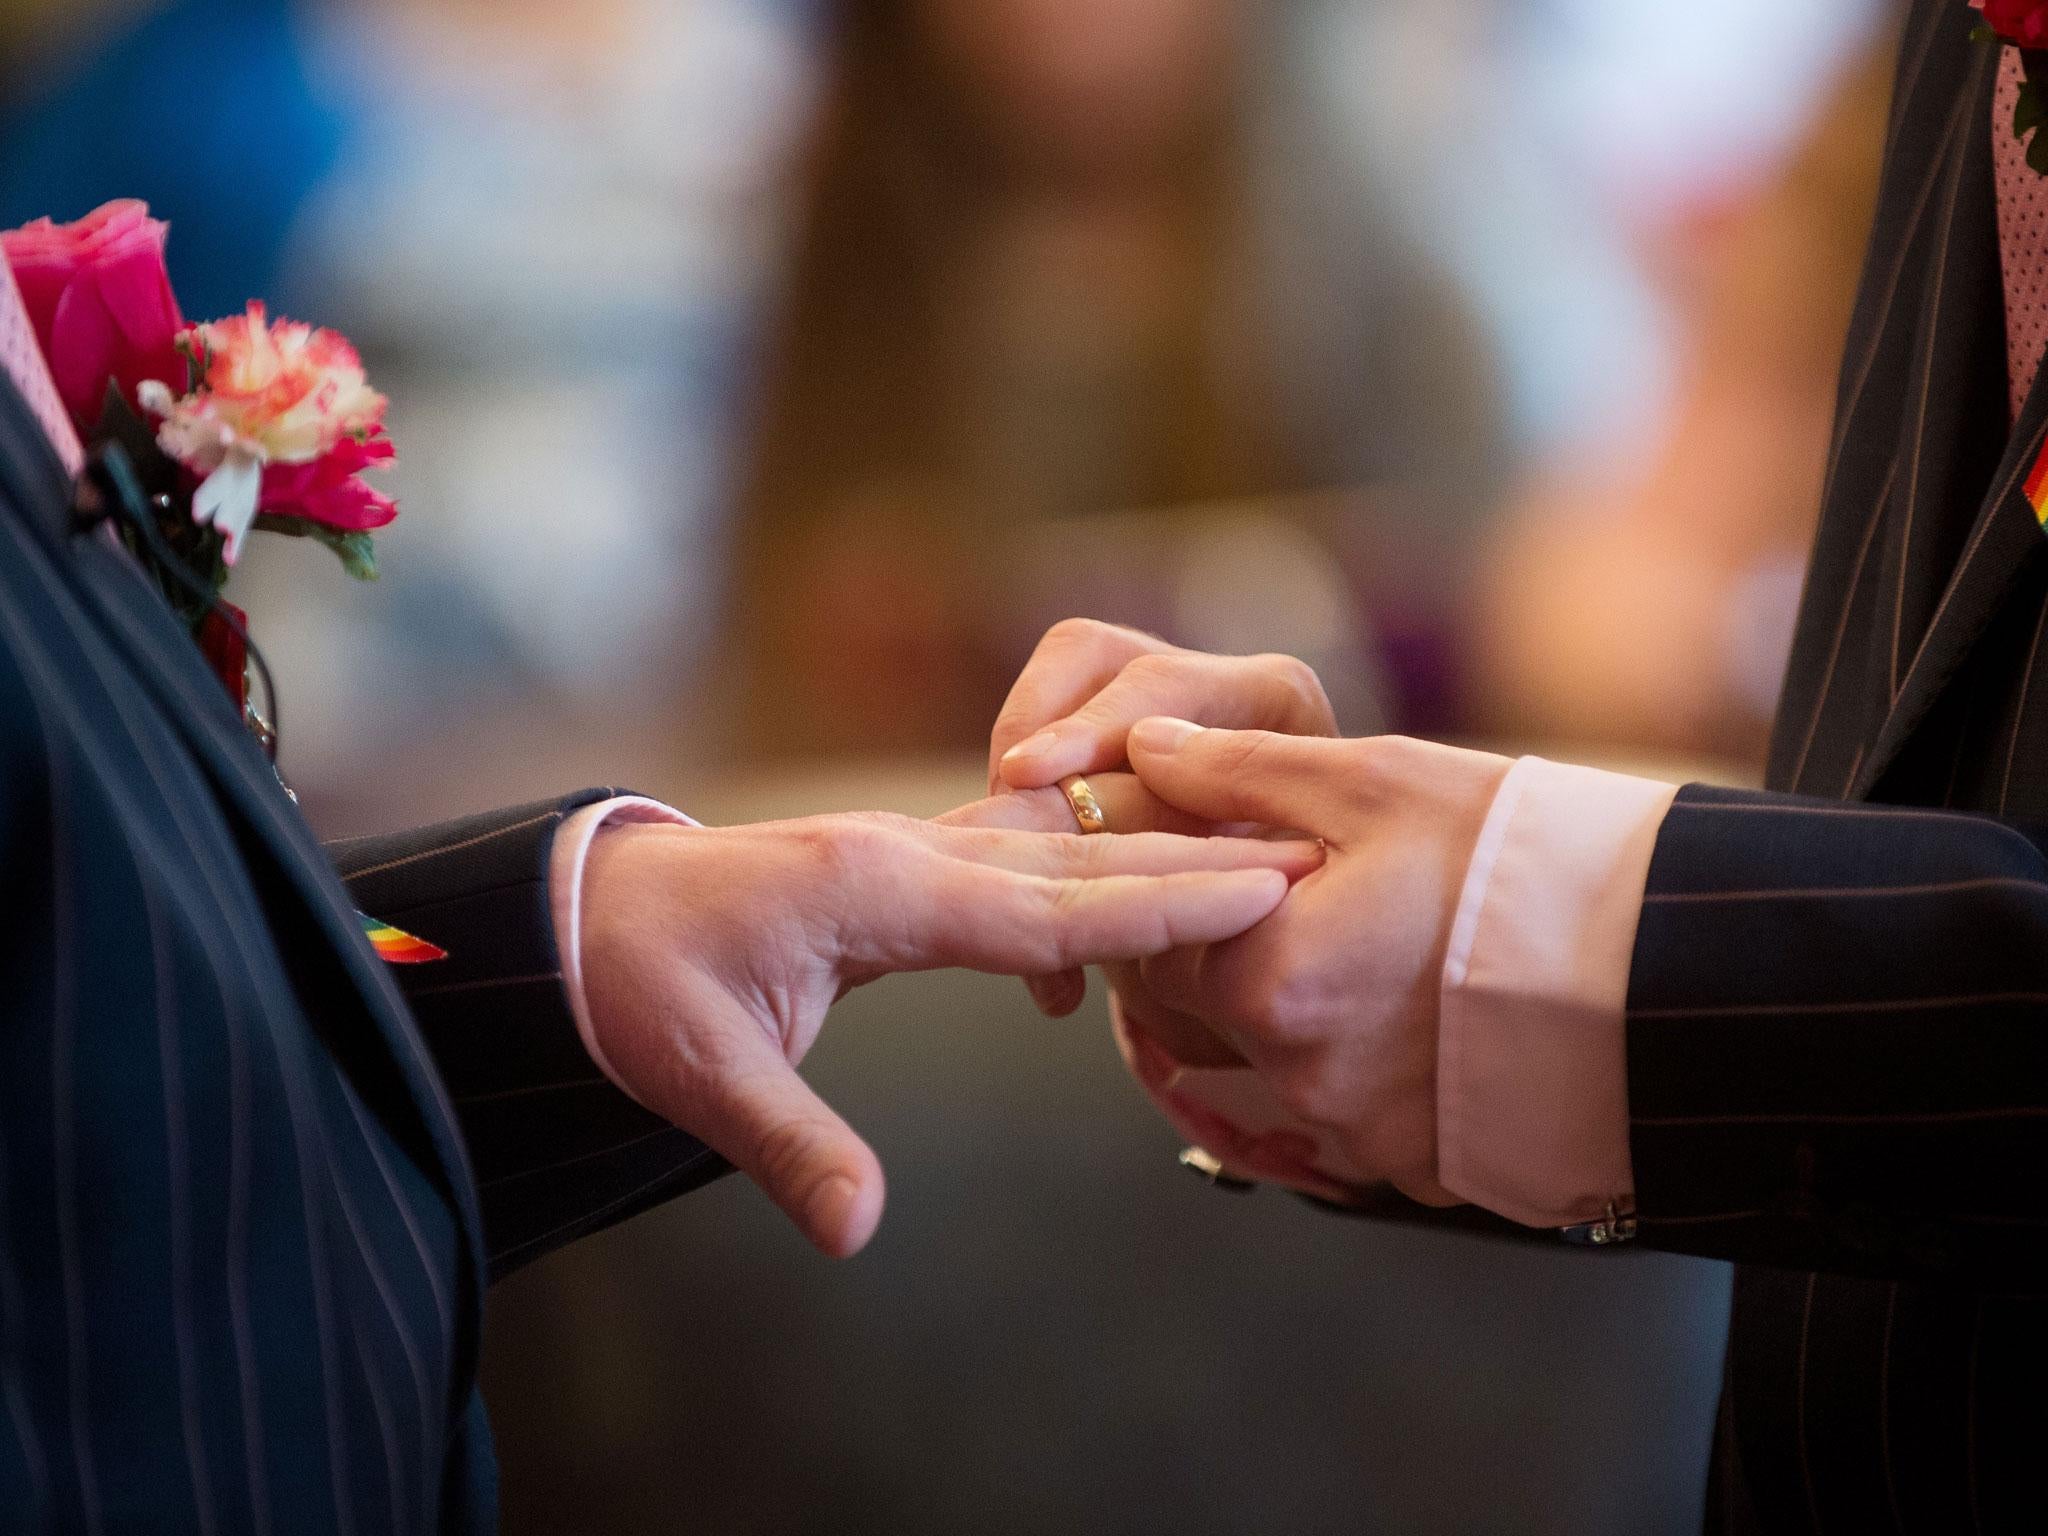 It turns out that your job could help you predict who you'll end up marrying